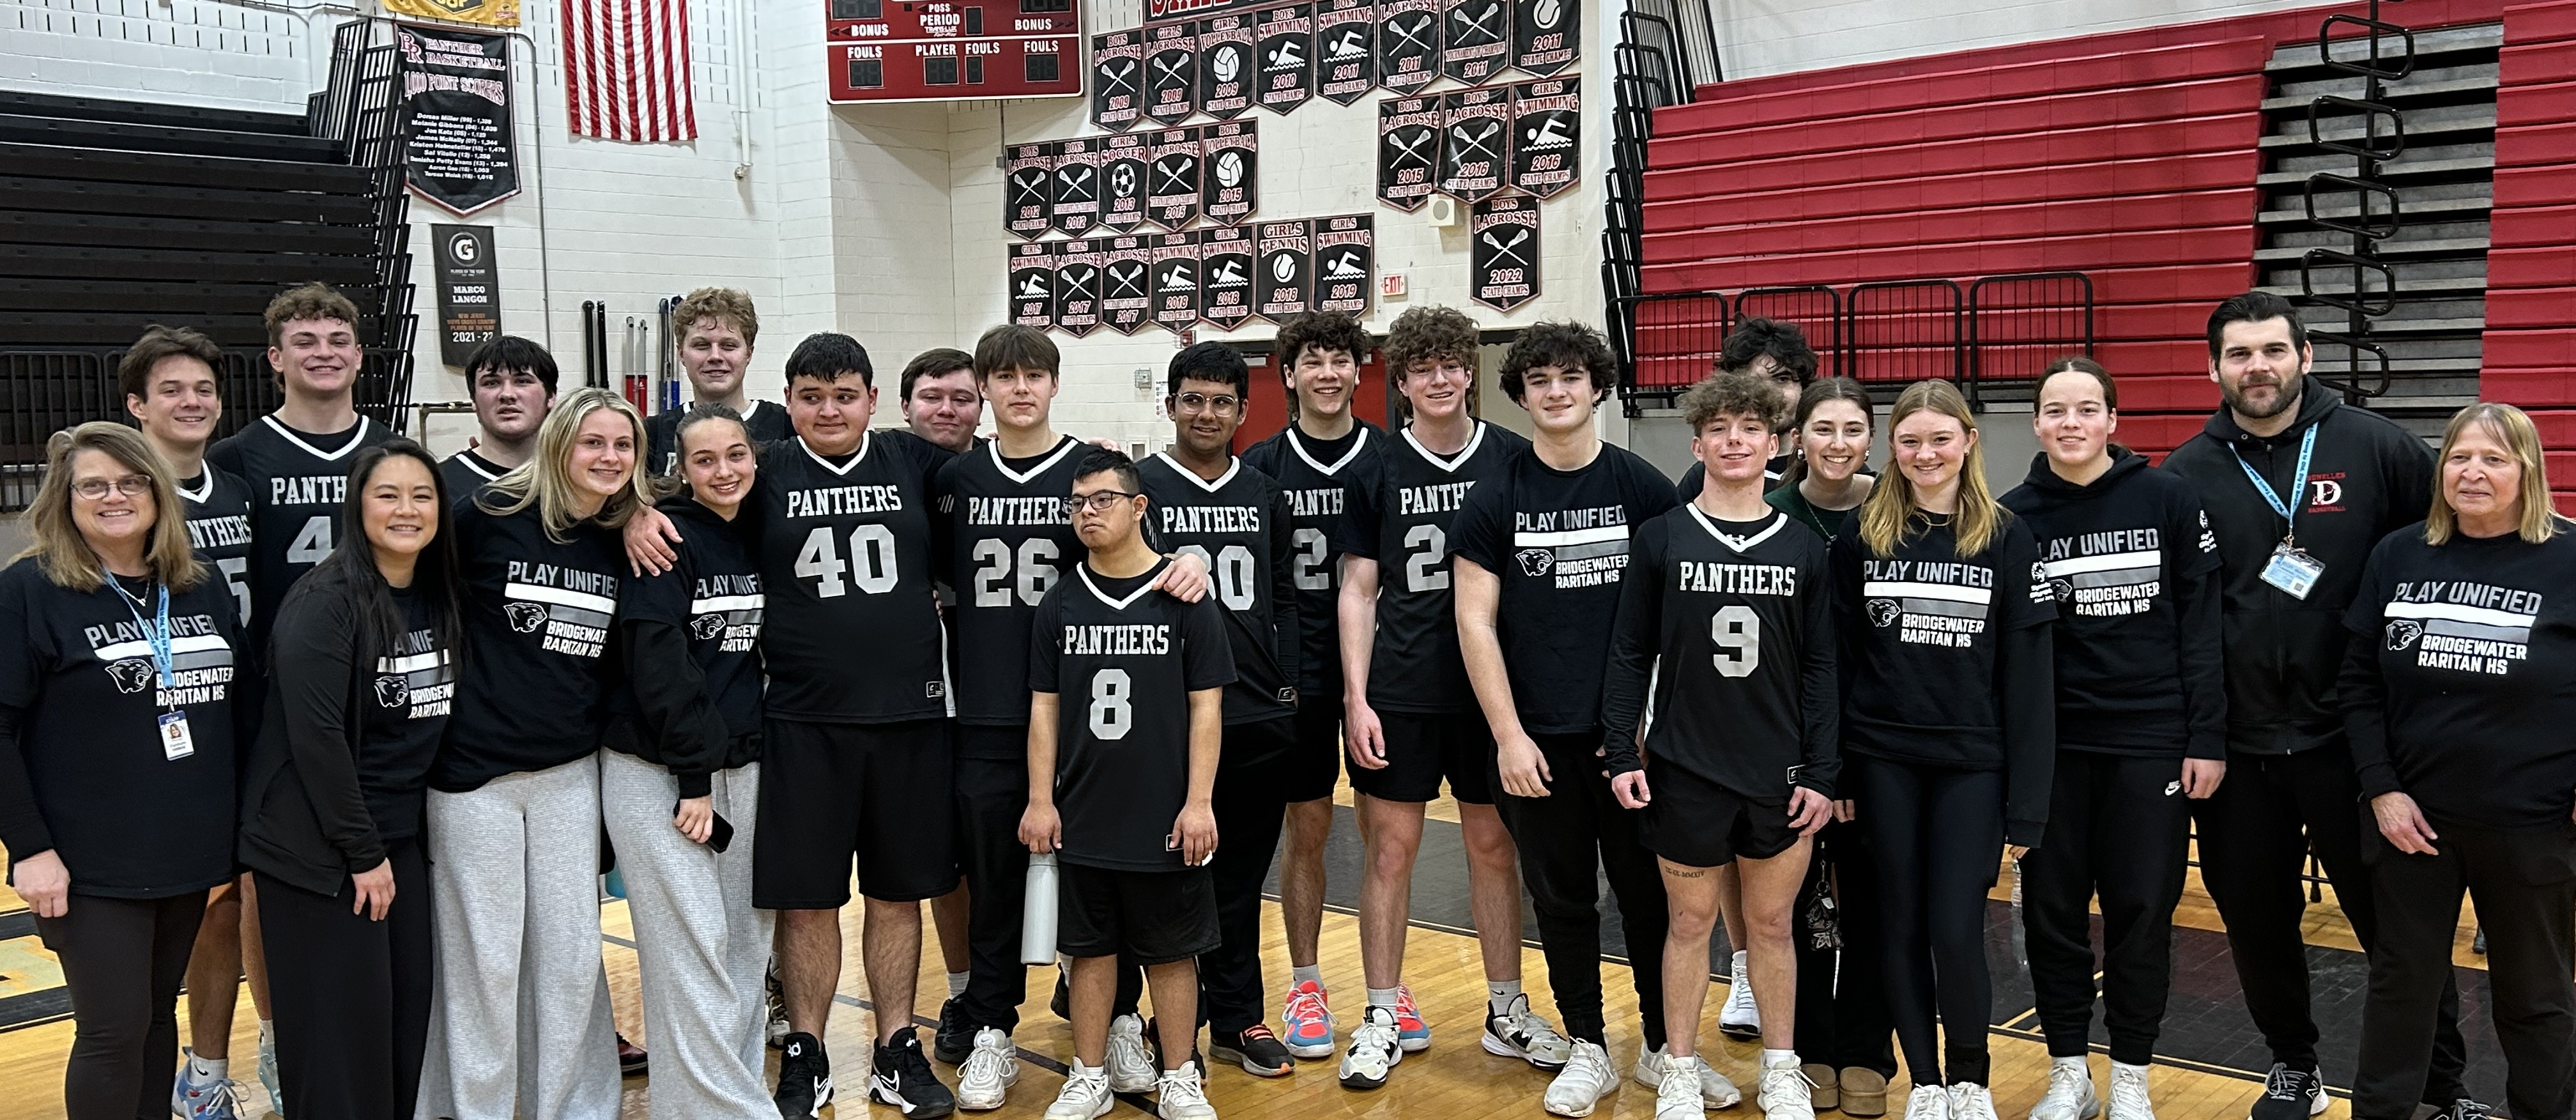 BRHS Unified Basketball